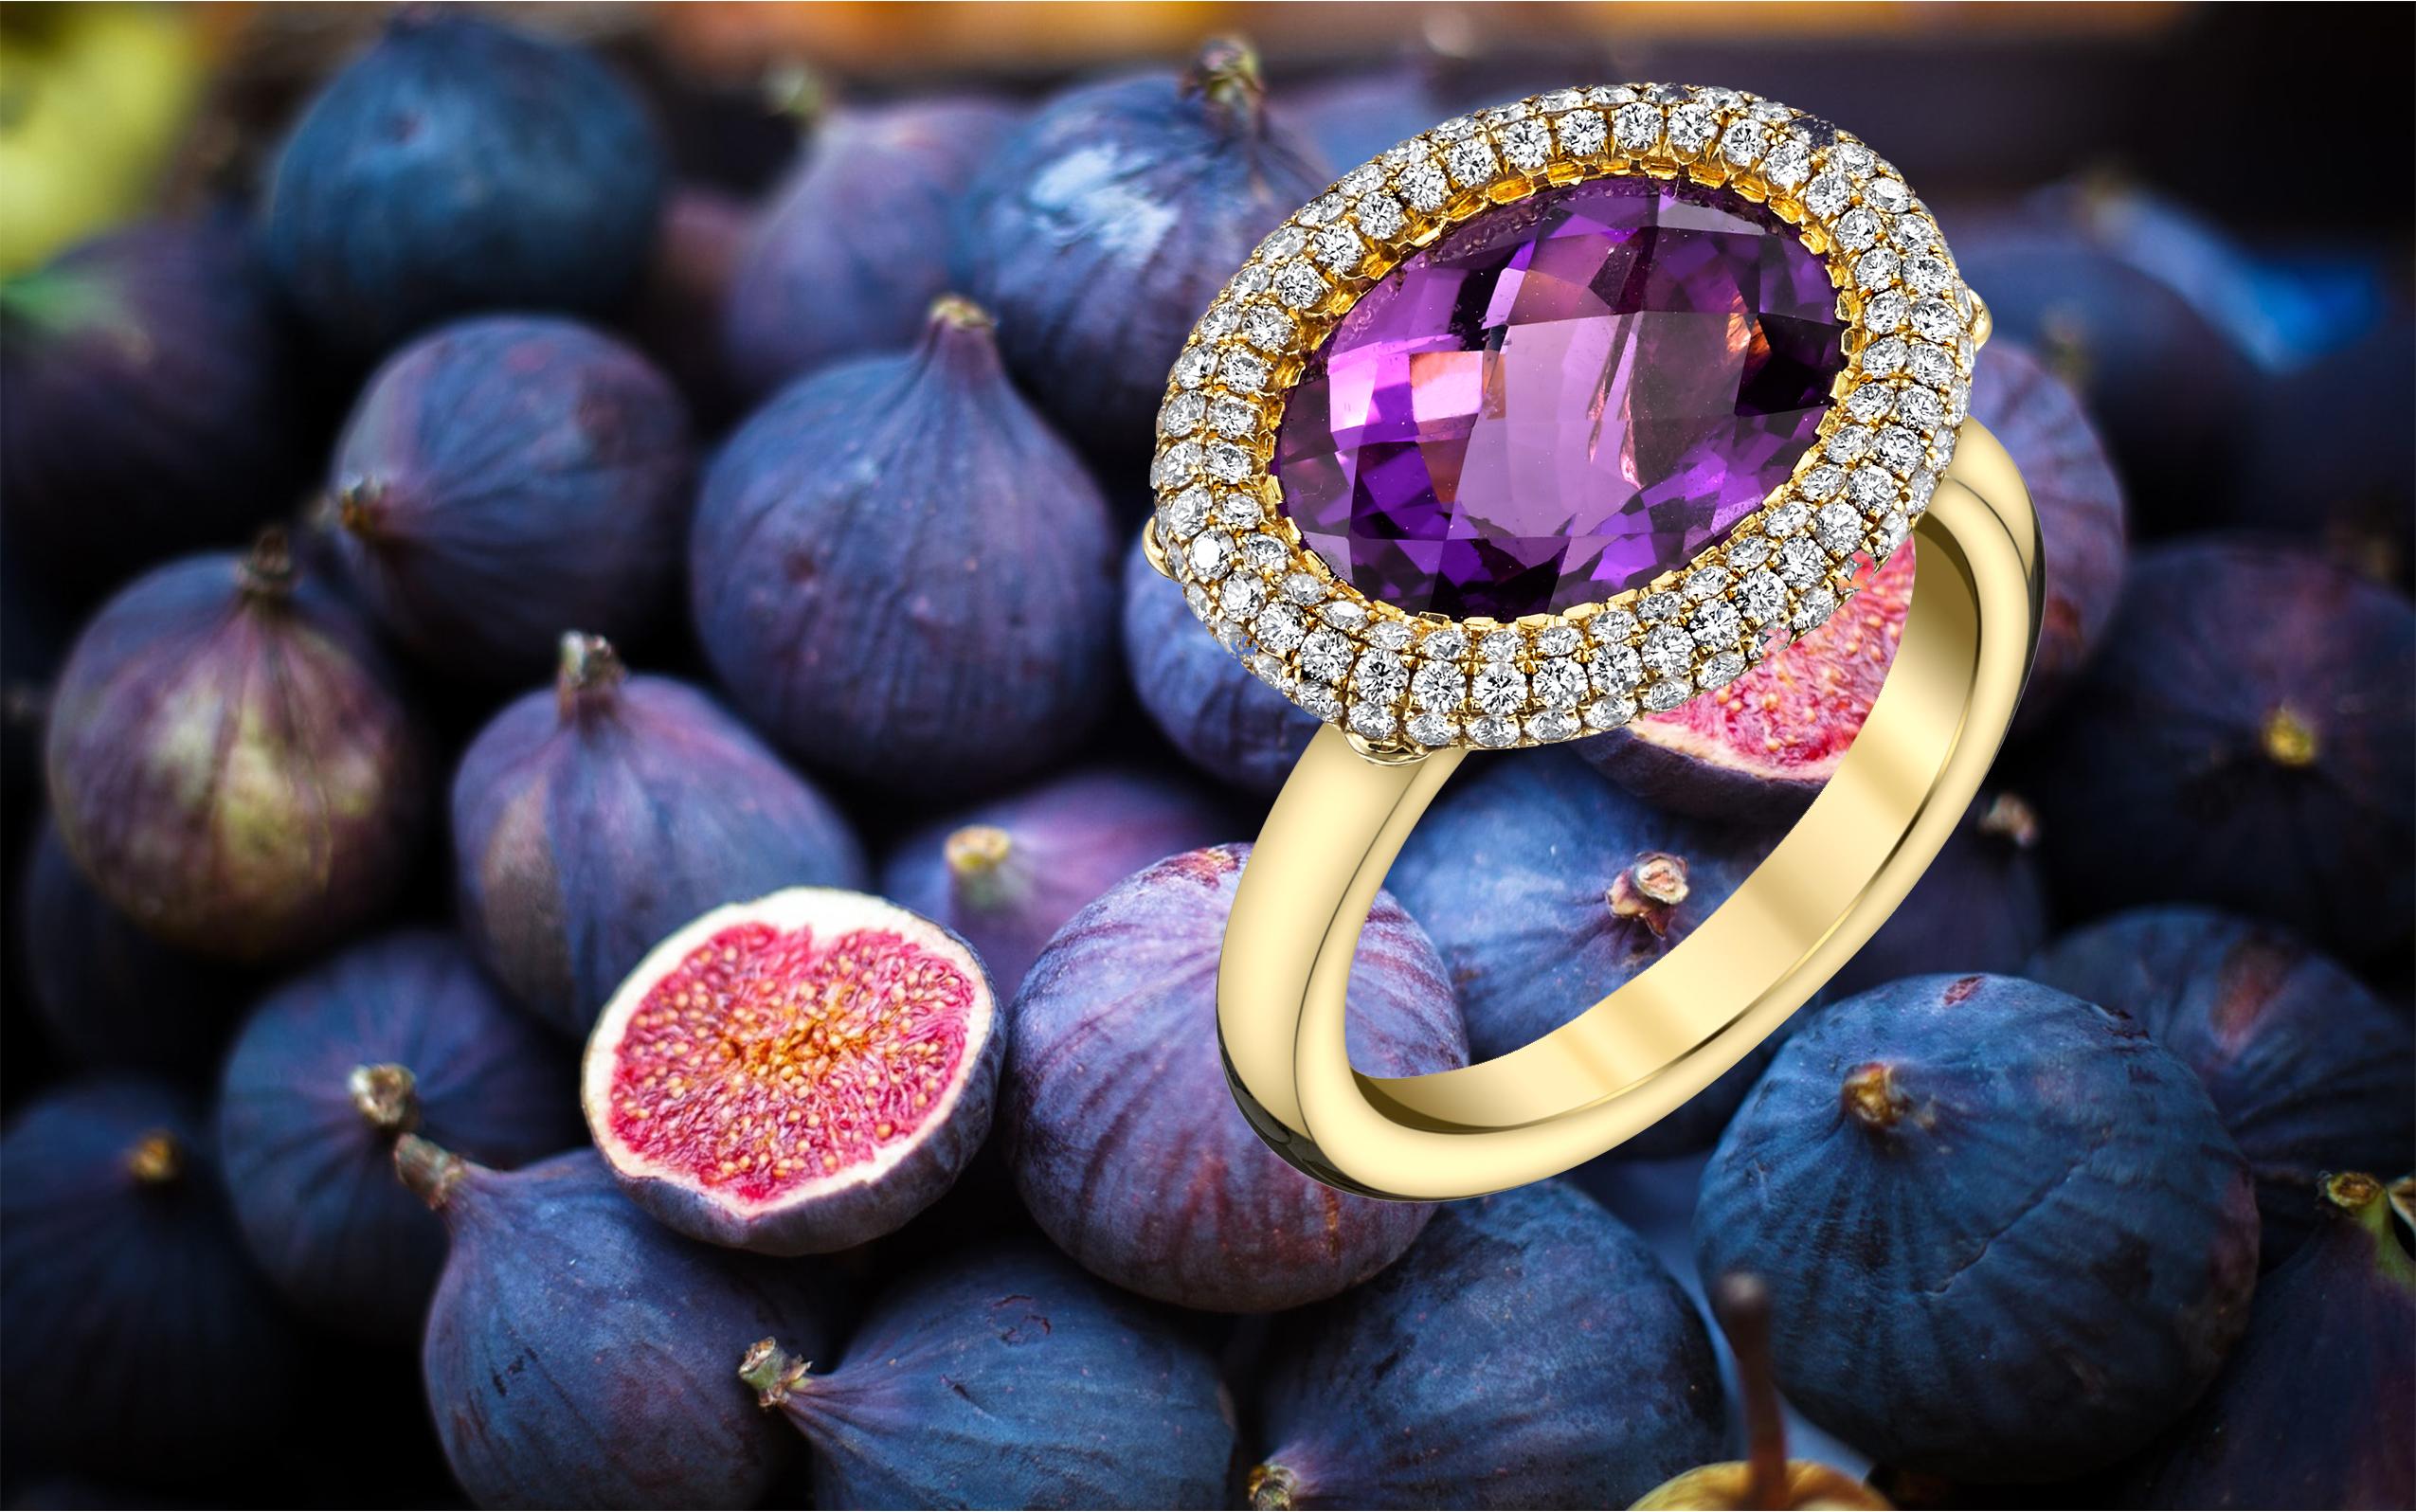 This one-of-a-kind Purple Amethyst Ring is a true masterpiece. The center stone, a radiant and striking amethyst, is held in a luxurious setting of 18 Karat Yellow Gold and accented with sparkling 0.71ct diamonds. The combination of the vibrant